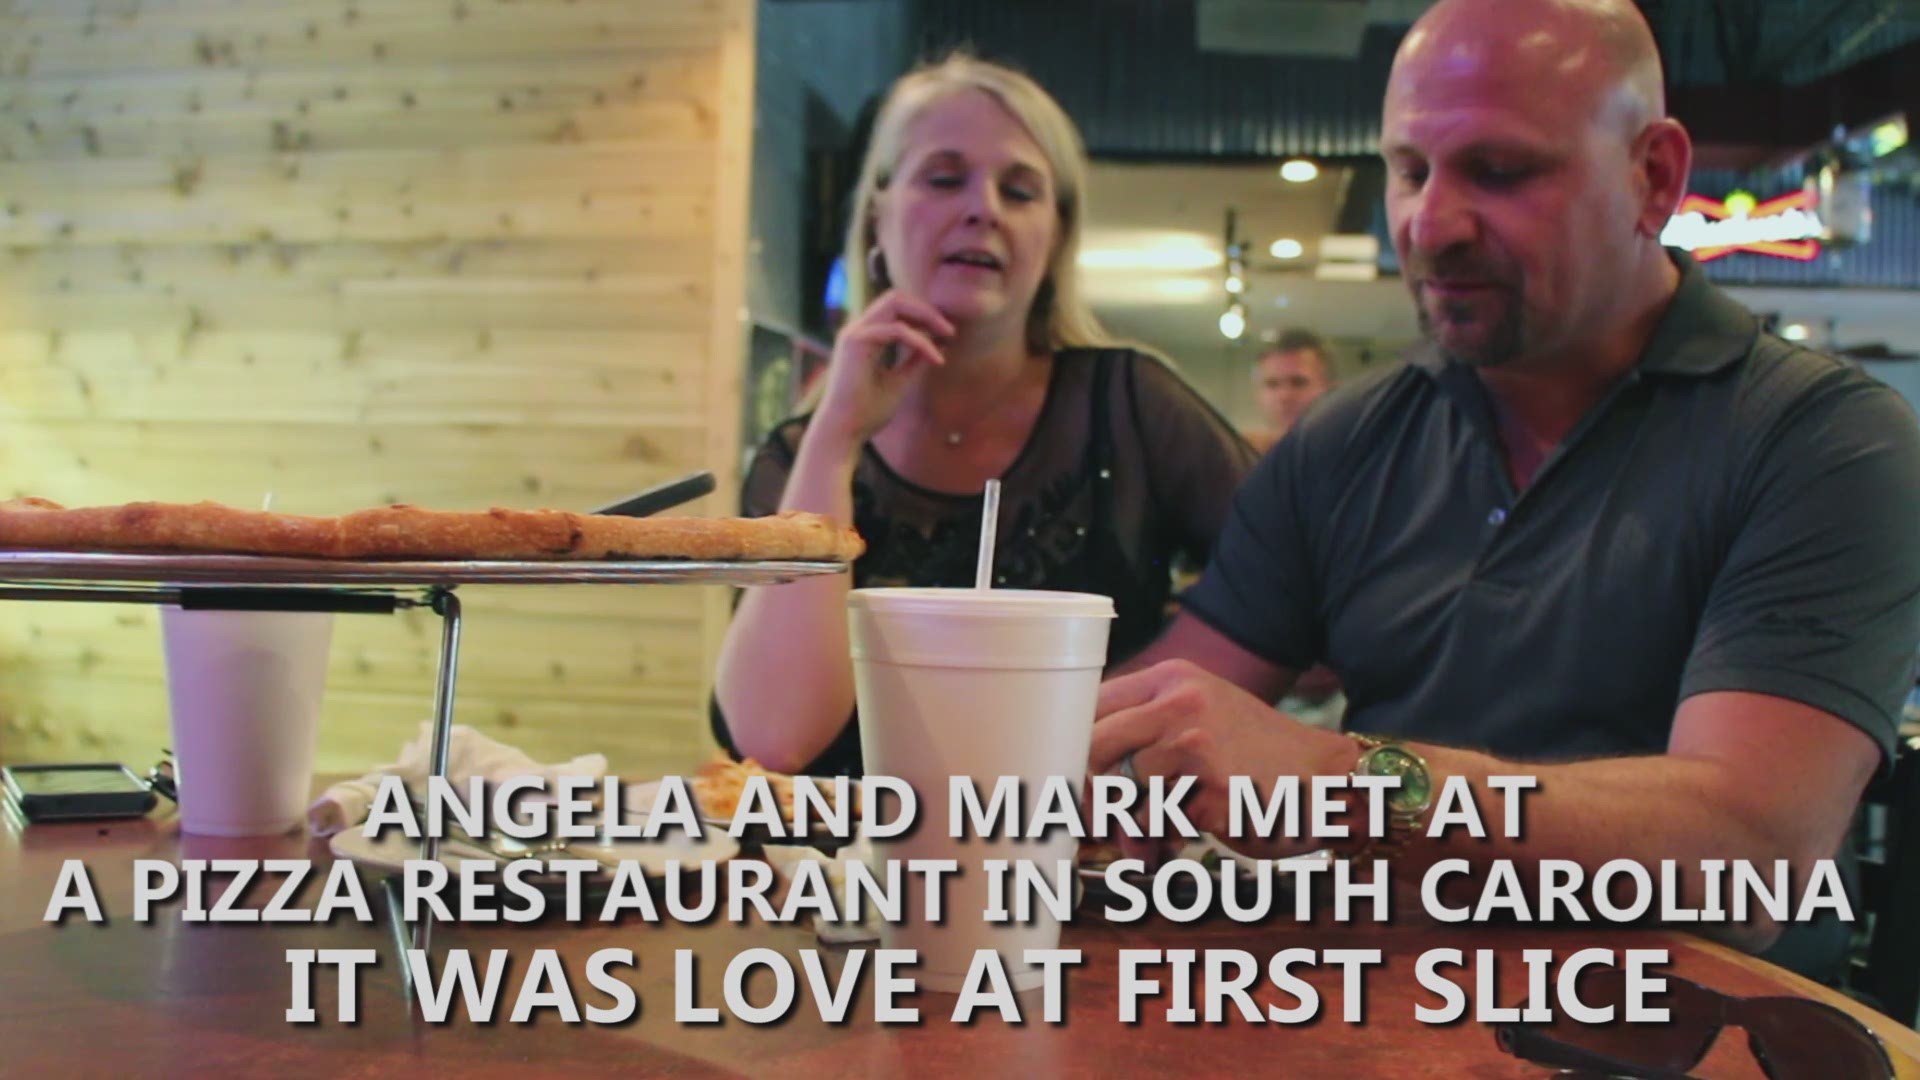 It was love at first slice for one South Carolina couple.